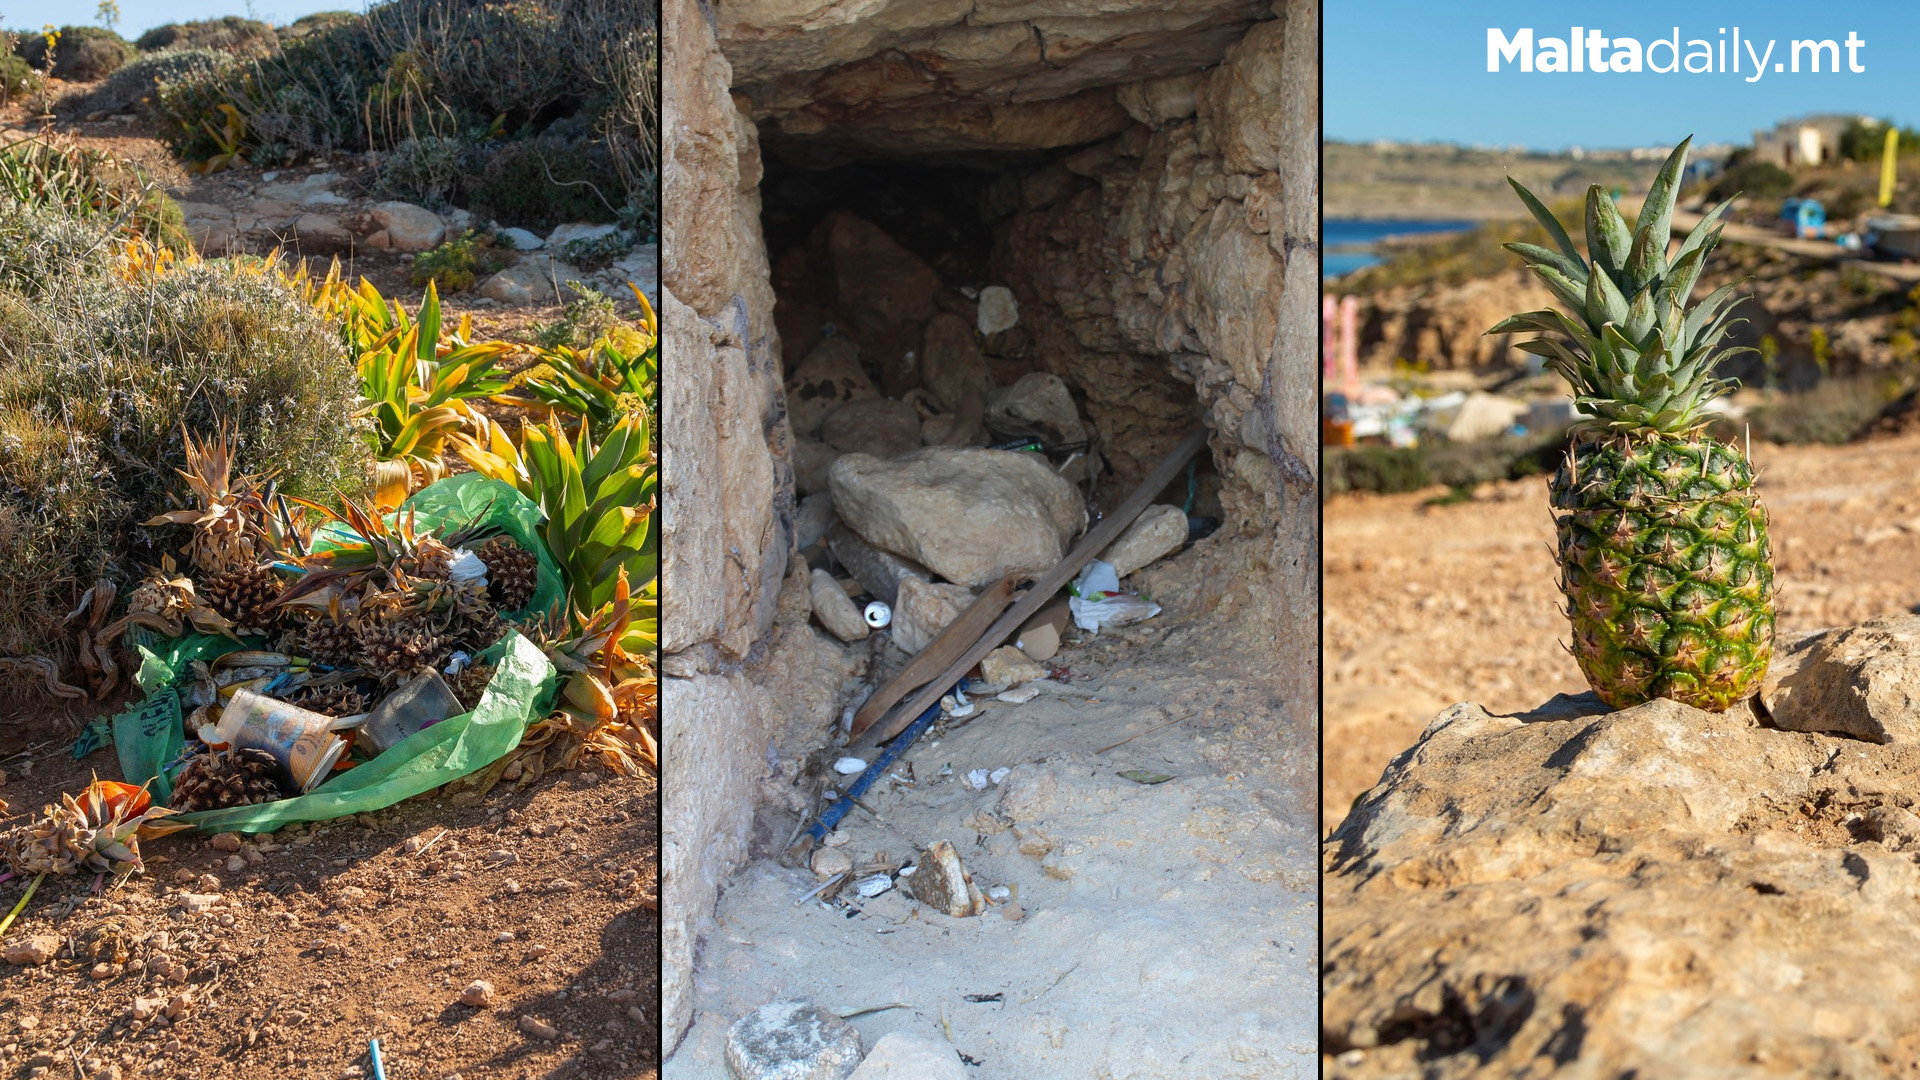 Comino Already Littered With Rubbish, NGO Reports